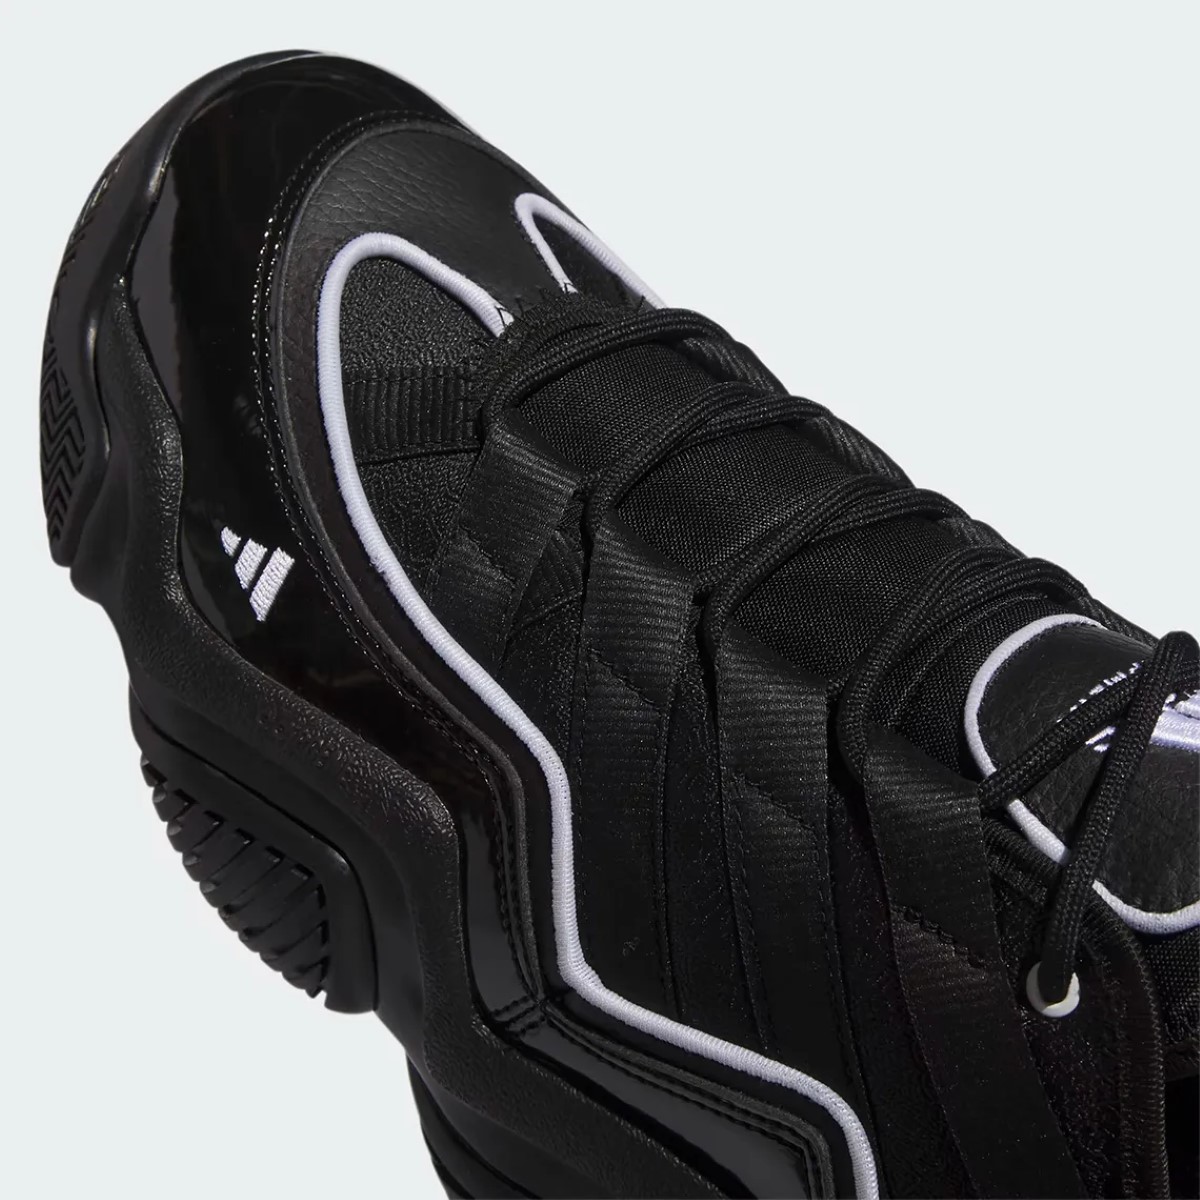 The sleek resurgence of the adidas Top Ten 2010 in black patent leather